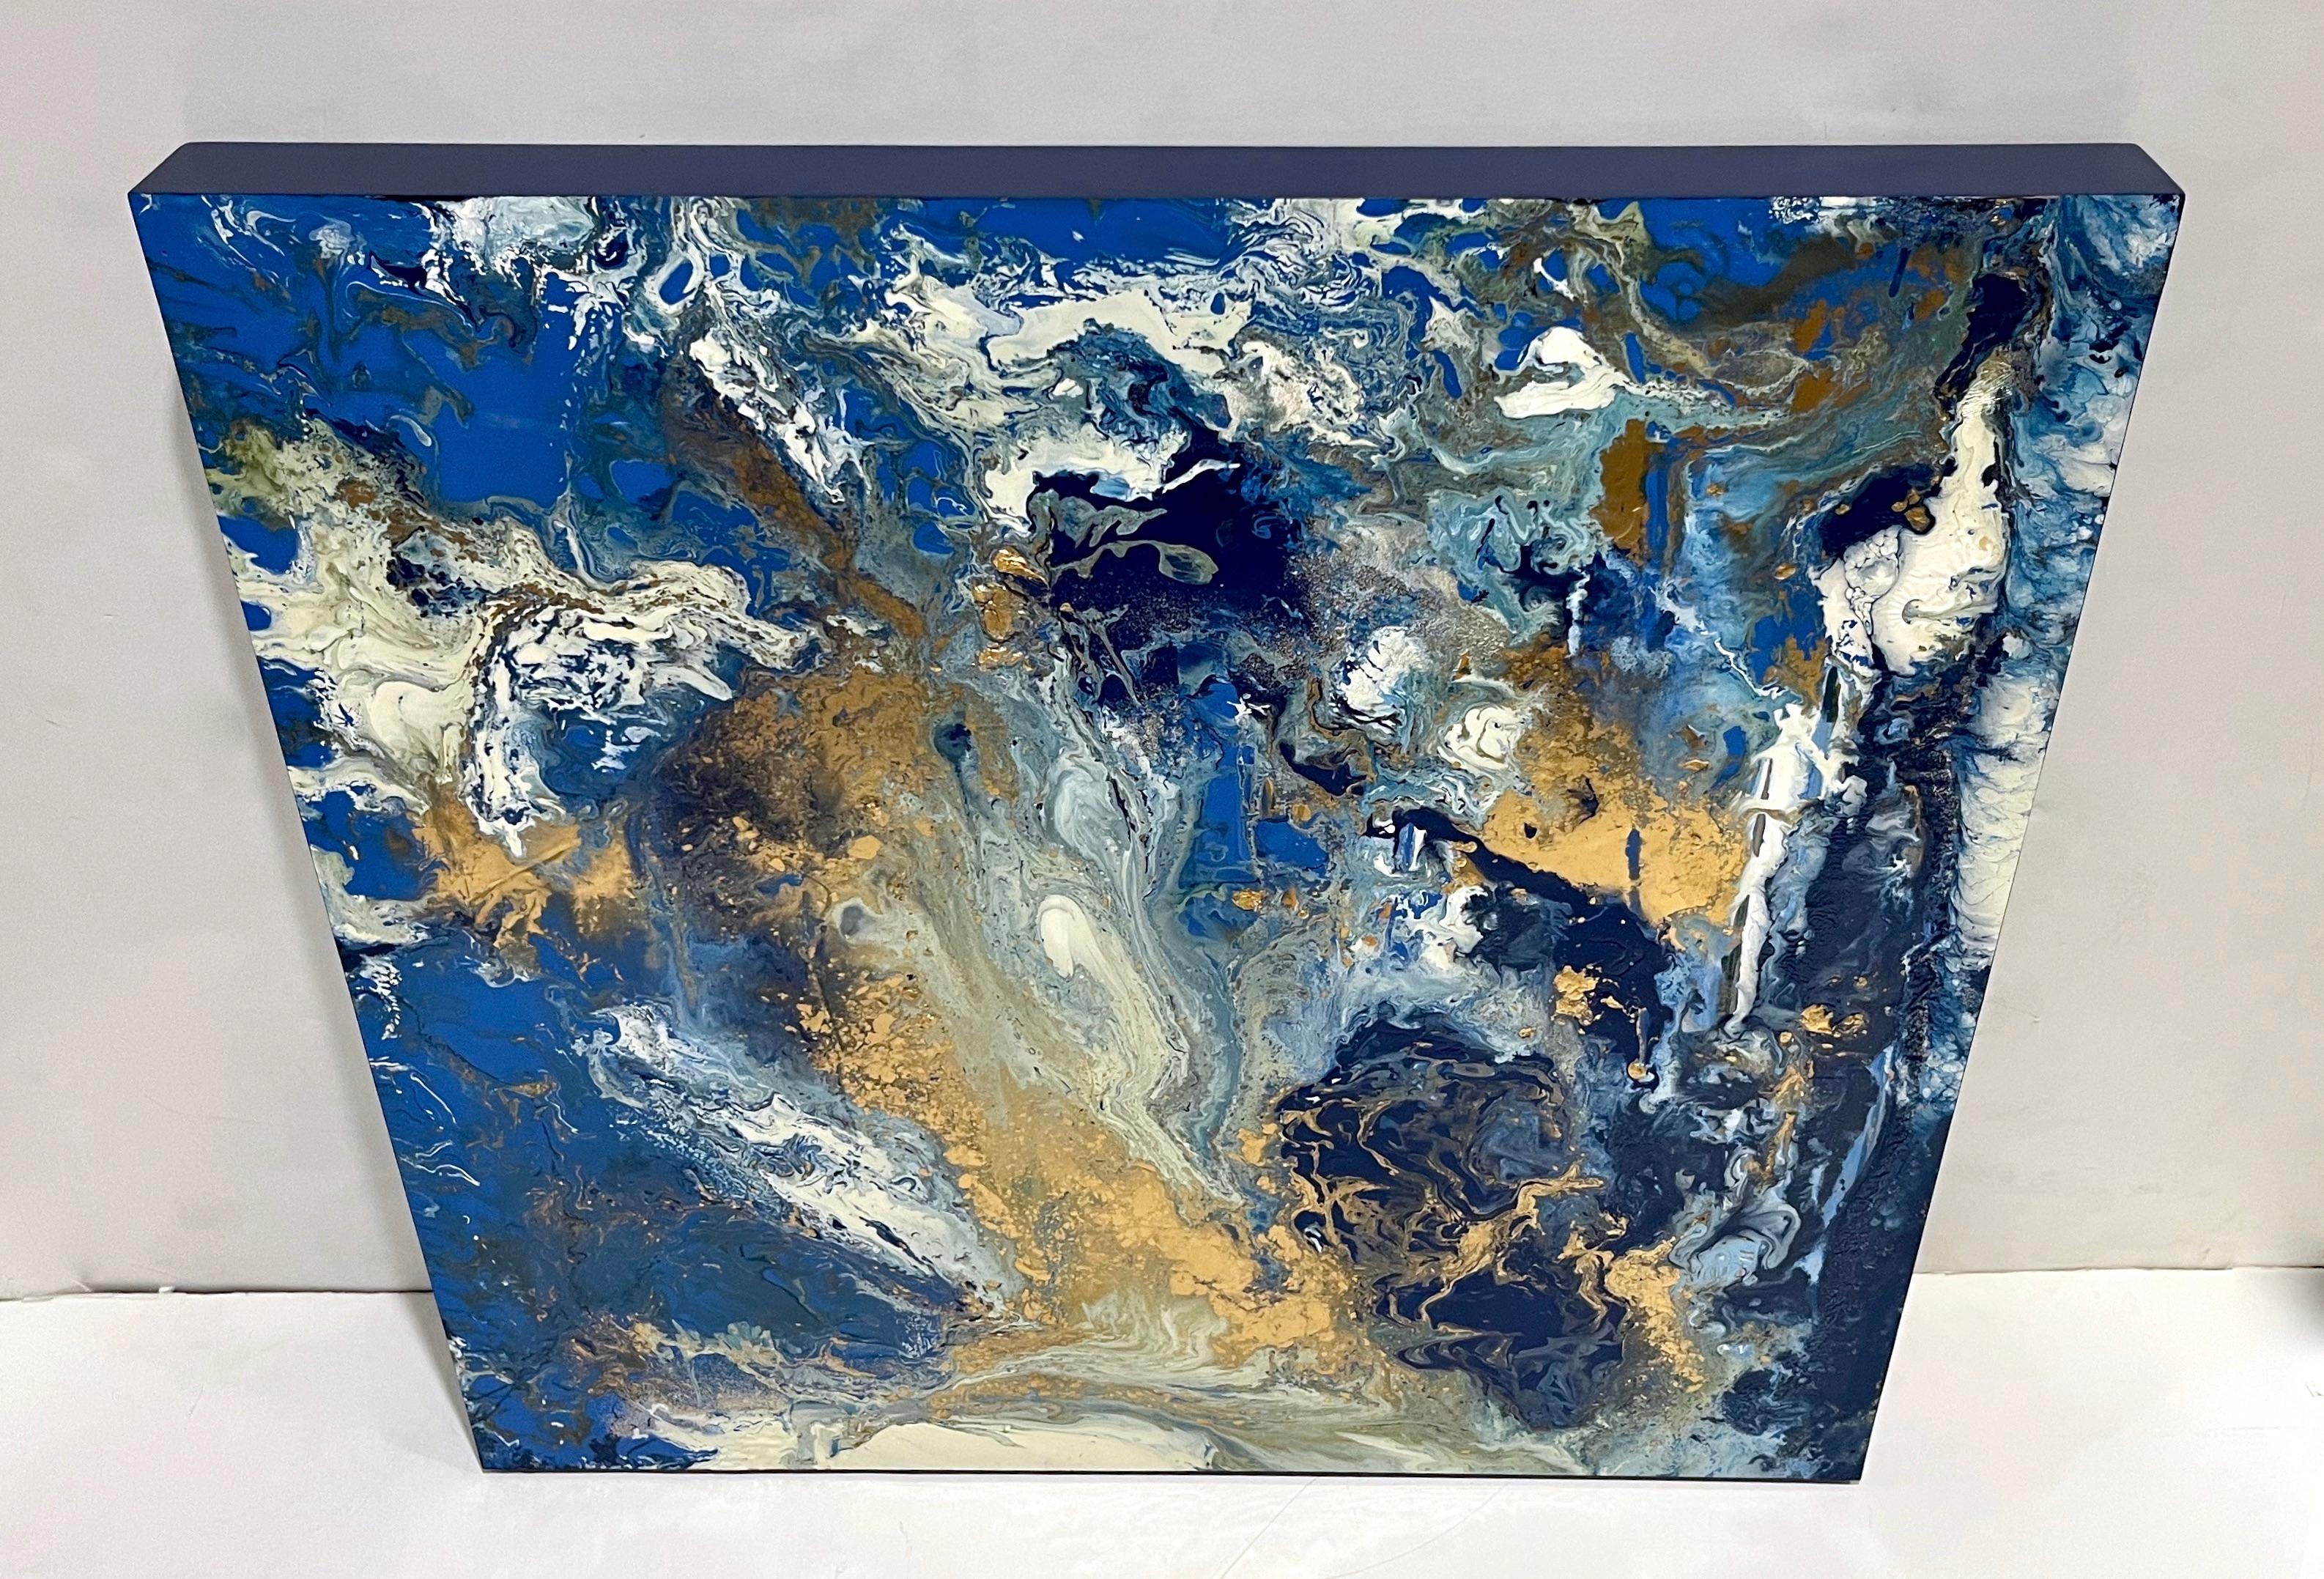 Bring color and an energized feel to your interior with this contemporary Italian Oil Painting on Board. By unknown artist, the abstract paint splatter decor in marbling white, royal and cobalt blues, enriched with gold paint made of genuine 24k